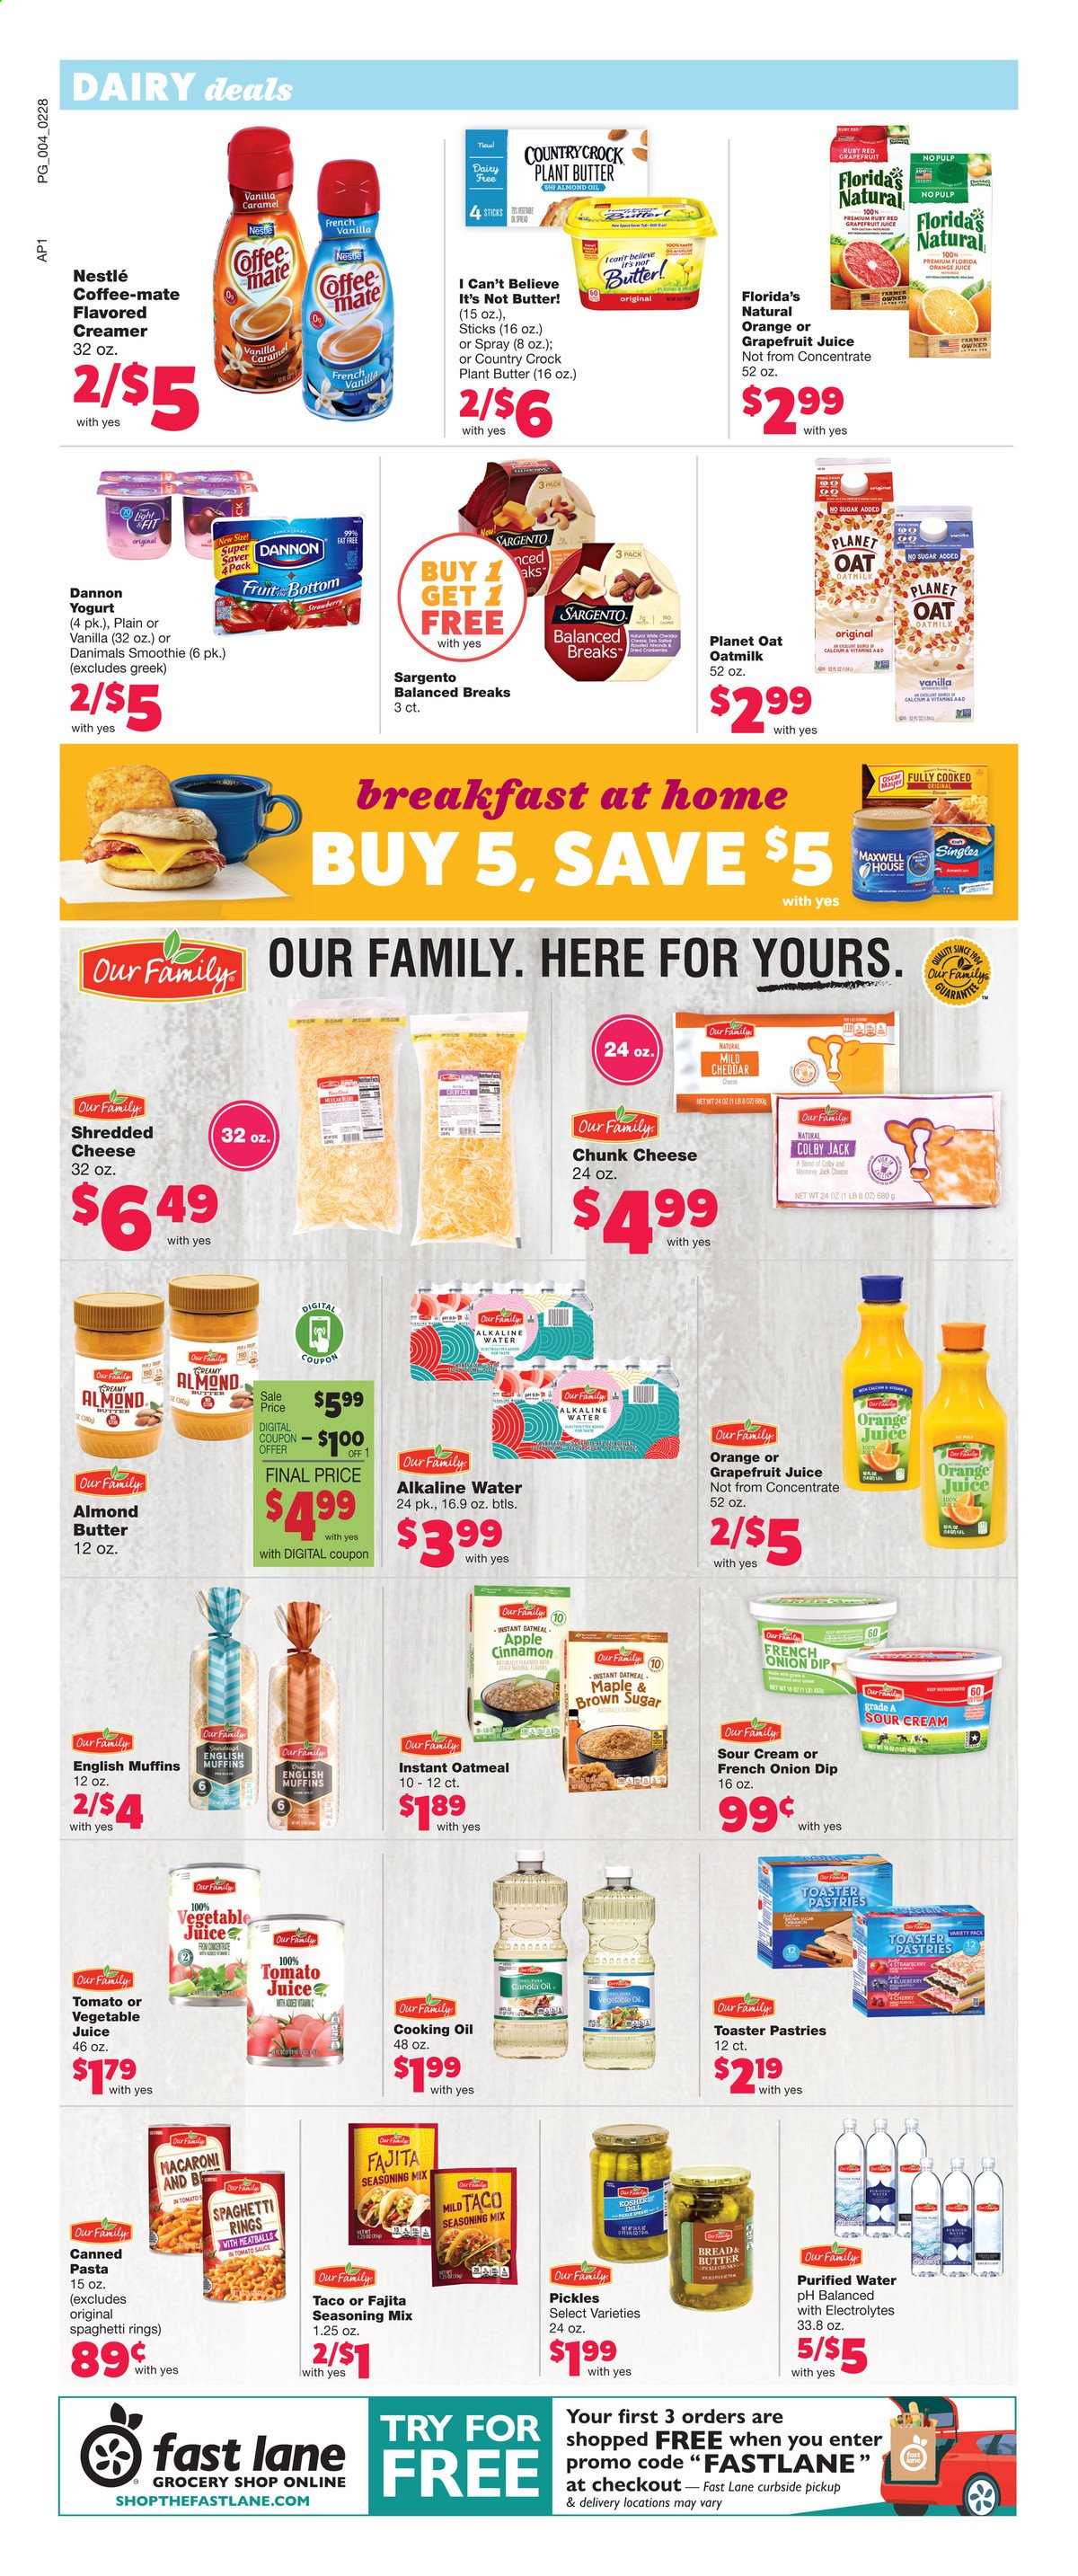 thumbnail - Family Fare Flyer - 02/28/2021 - 03/06/2021 - Sales products - pickles, bread, muffin, english muffins, meatballs, fajita, Colby cheese, mild cheddar, shredded cheese, chunk cheese, Sargento, yoghurt, Dannon, Danimals, Coffee-Mate, oat milk, almond butter, I Can't Believe It's Not Butter, sour cream, creamer, dip, Nestlé, Florida's Natural, cane sugar, oatmeal, oats, spaghetti, macaroni, pasta, cinnamon, caramel, canola oil, almonds, orange juice, juice, vegetable juice, smoothie, purified water, Maxwell House, grapefruits. Page 2.